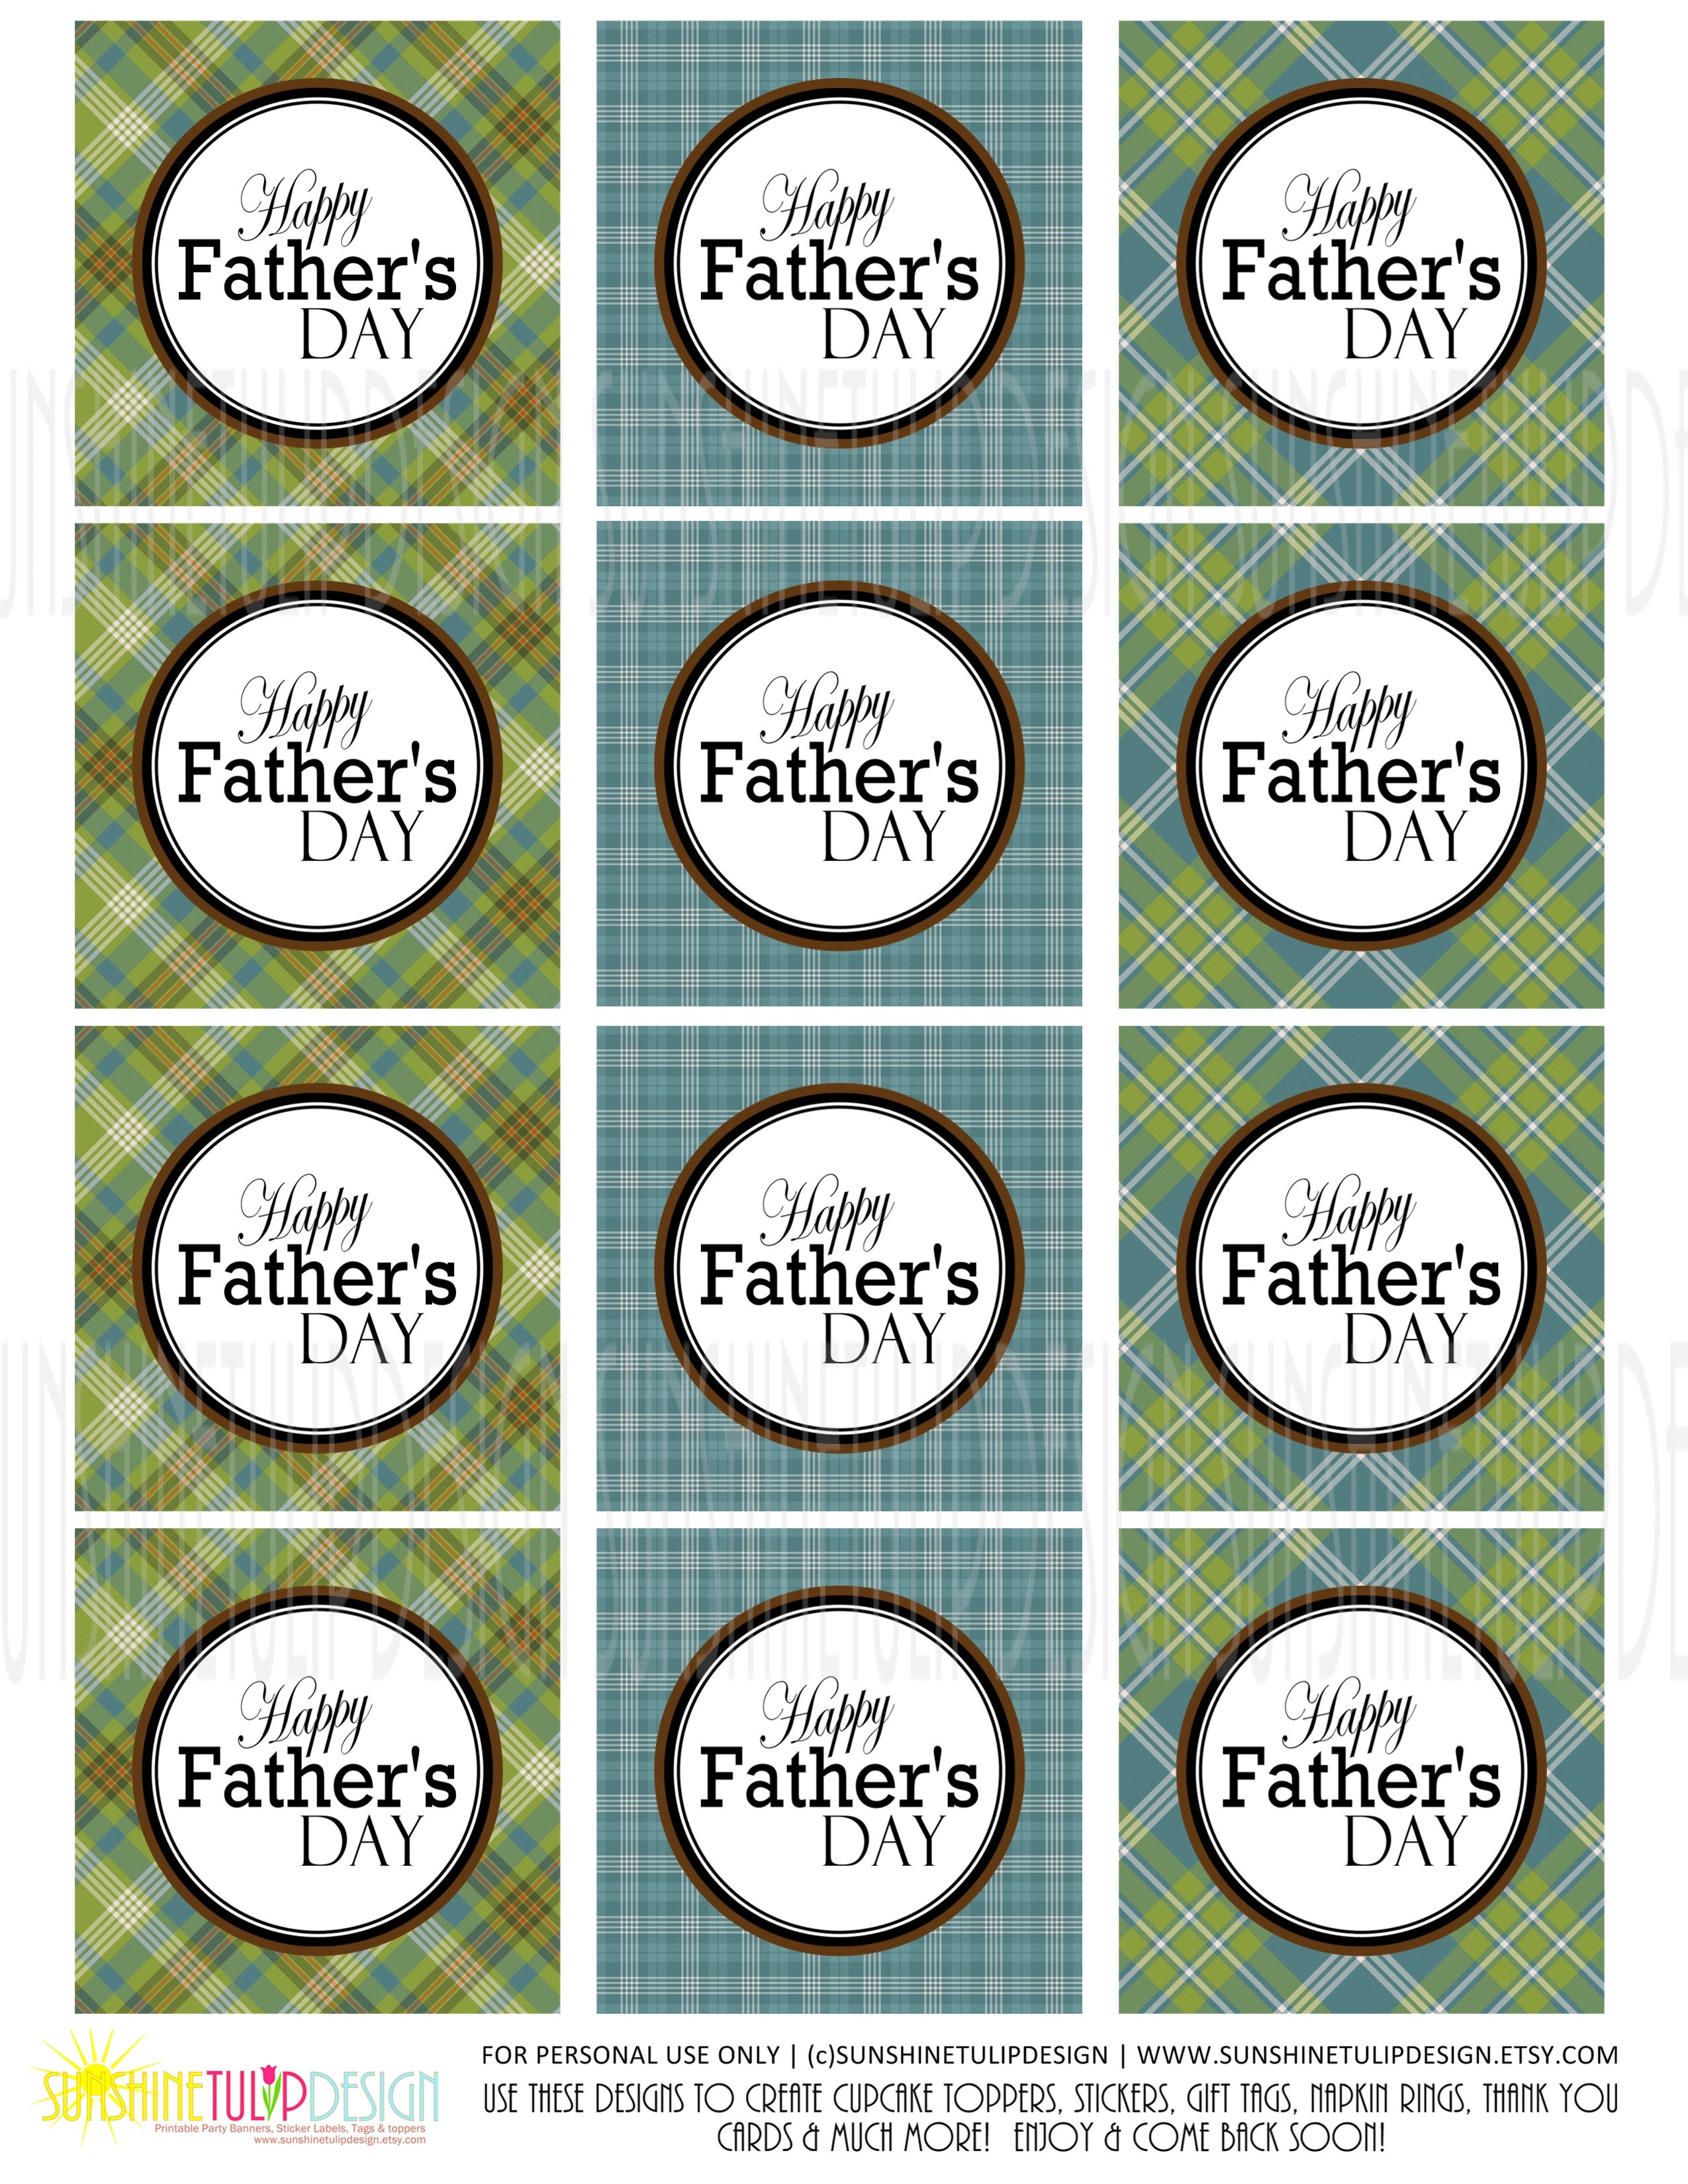 Father's Day Trackable Tags (by NE Geocaching Supplies)